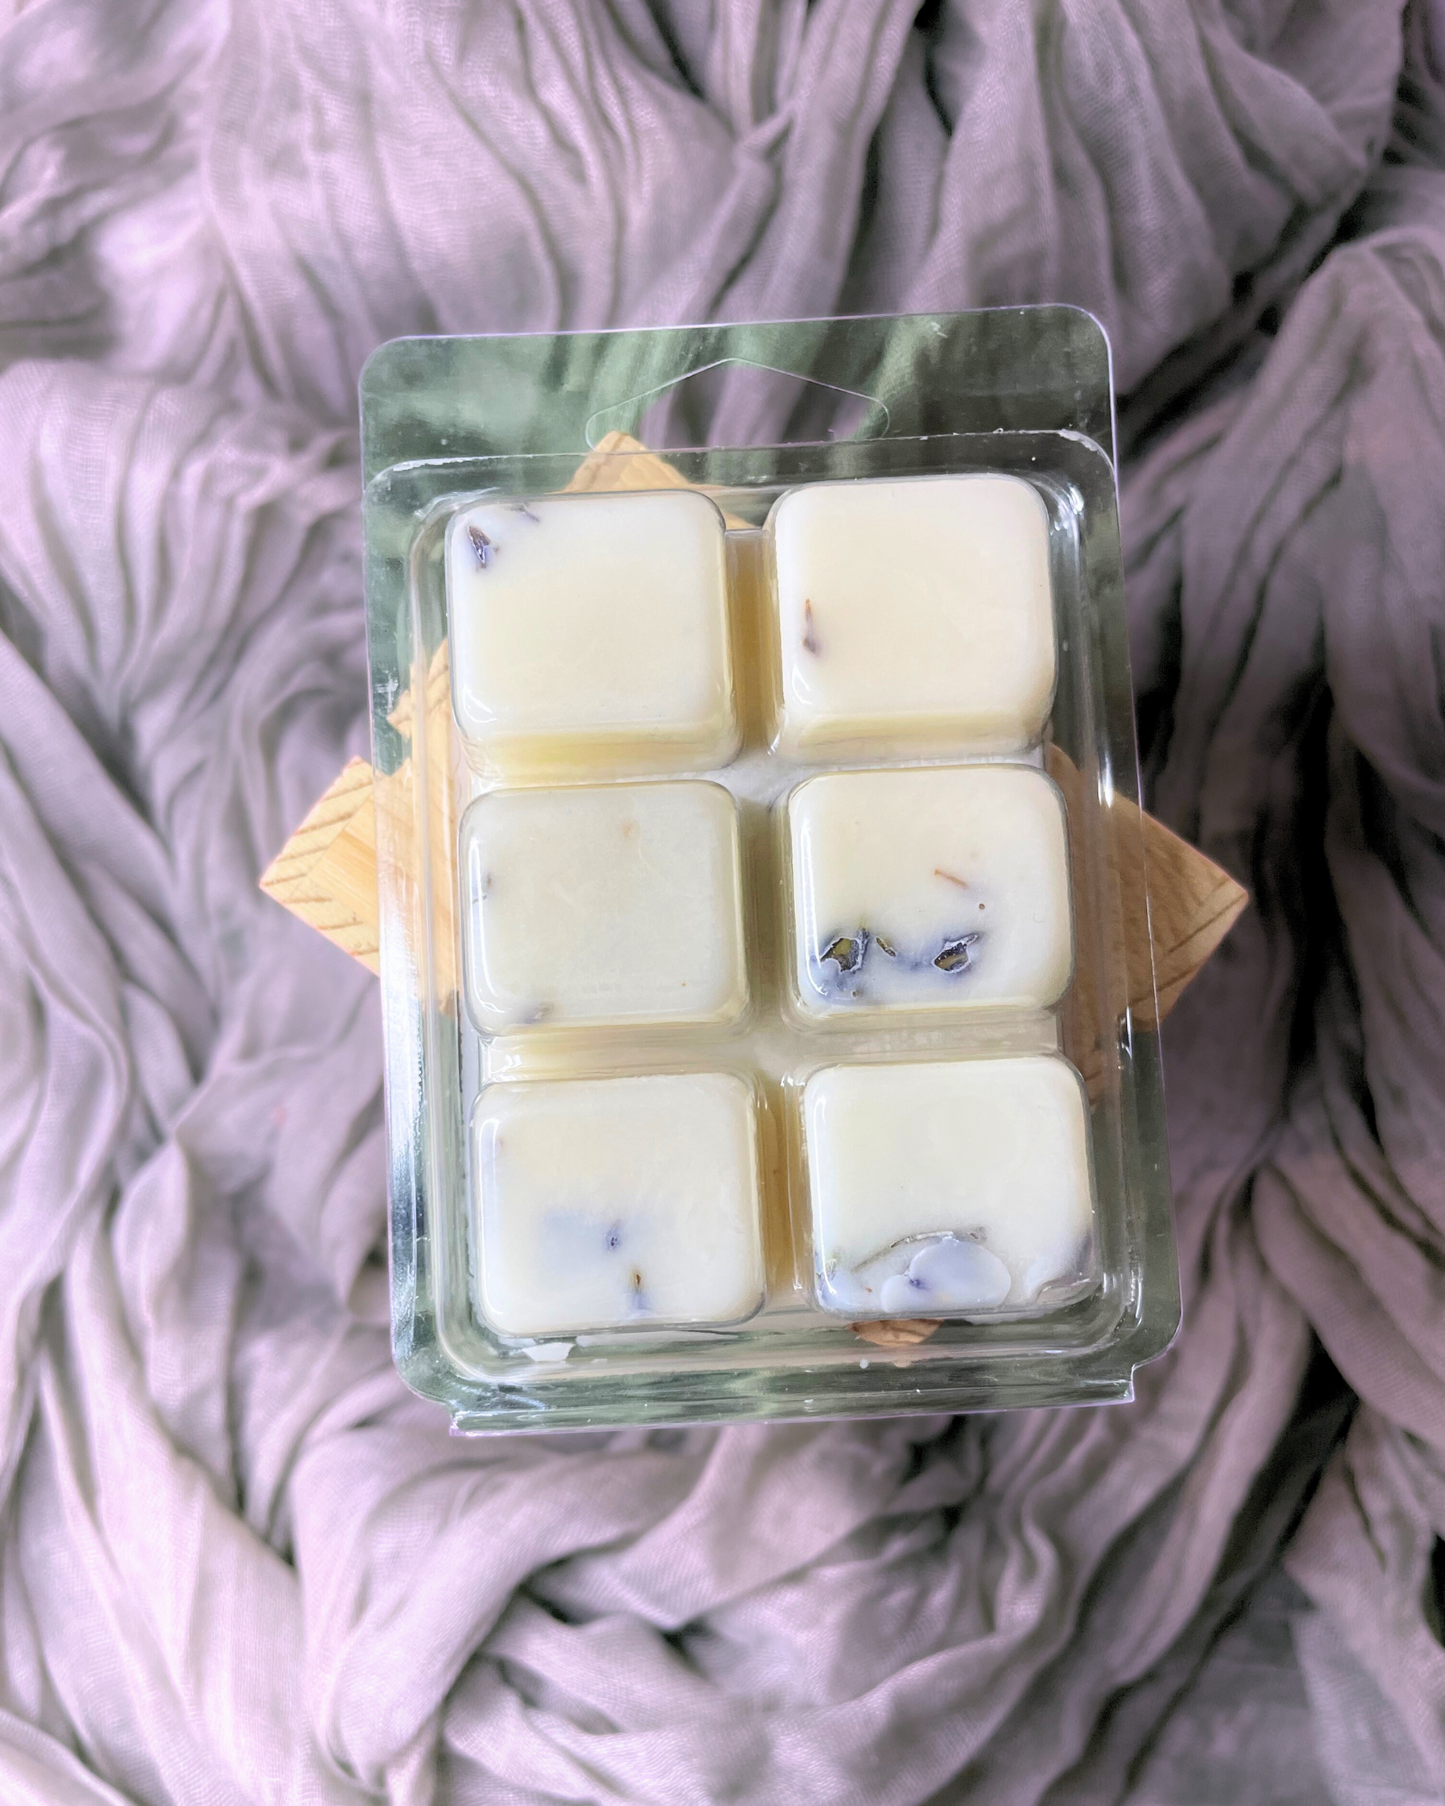 Lavender Field Soy Wax Melts- Farmhouse Charm is our latest blend of lavender. It has a deep and sophisticated blend of French Lavender and exotic amber with tones of tonka beans and musk.  This rich and warm bouquet will fill your home with coziness and delight you after a long day. This wax melts is infused with natural lavender buds to enhance the aroma. www.farmhousecharmcandles.com